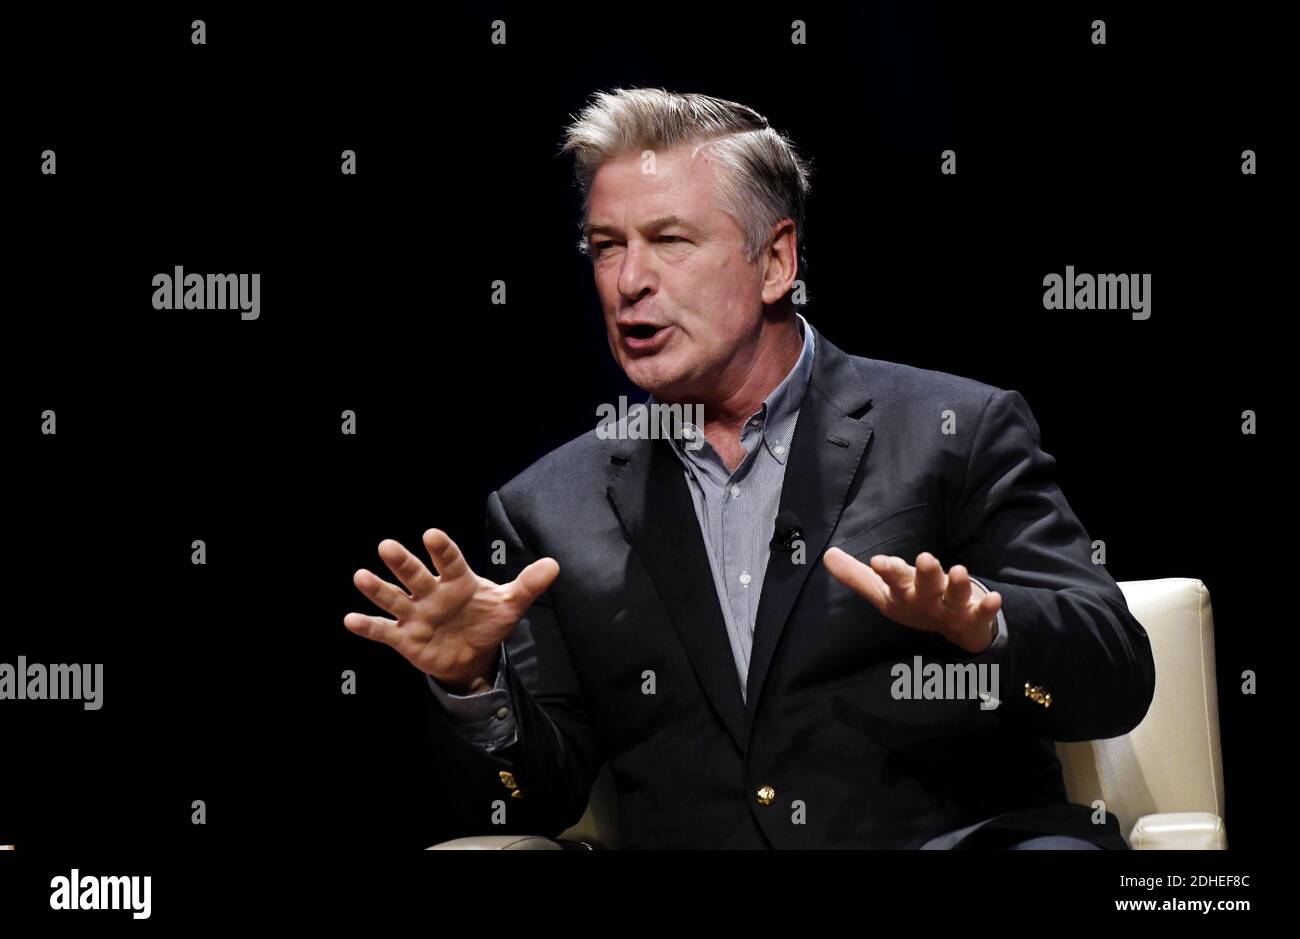 America’s foremost Donald Trump impersonator, Alec Baldwin speaks during an event to discuss the new book 'You Can’t Spell America Without Me ' a political satire of Donald Trump’s presidential memoir, November 14, 2017 at the George Washington Lisner Auditorium in Washington, DC, USA. Photo by Olivier Douliery/ABACAPRESS.COM Stock Photo